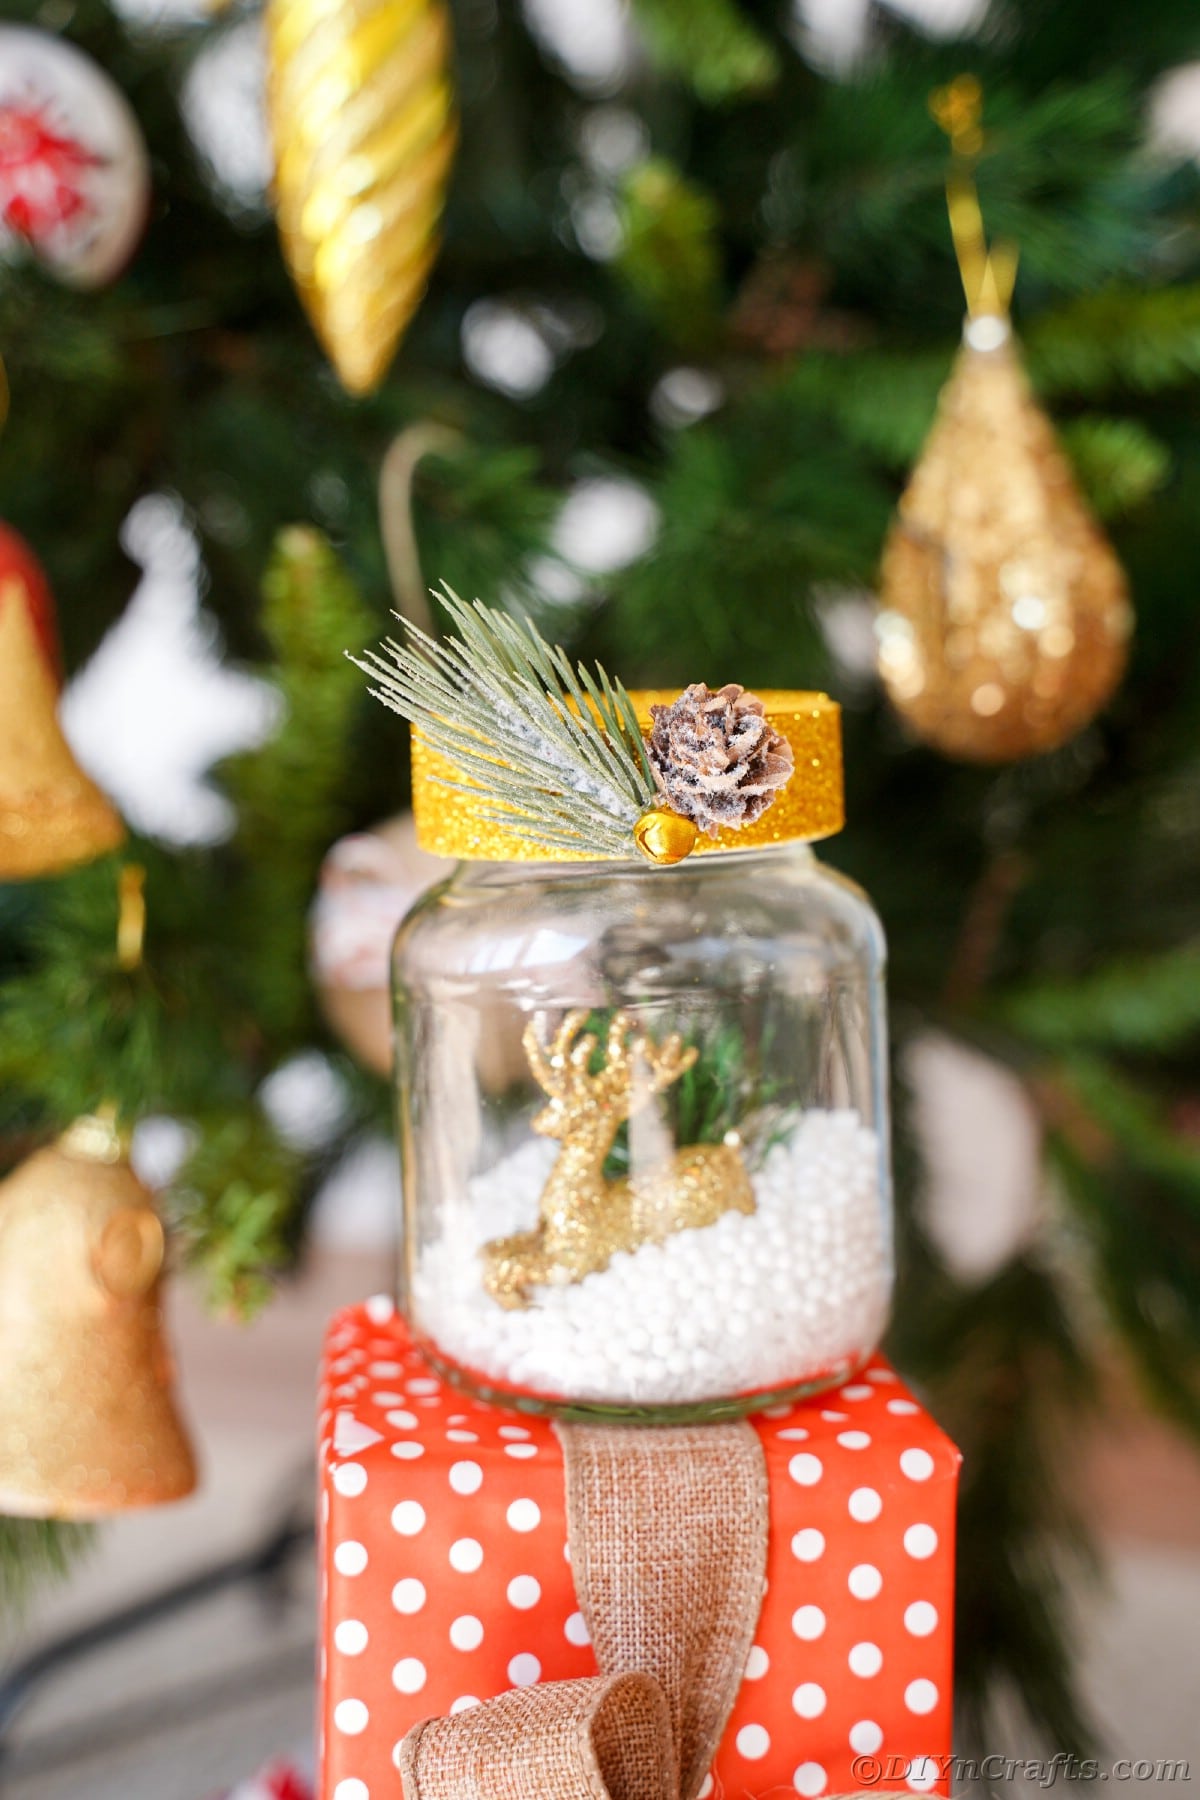 snow globe with gold top on red and white gift by tree